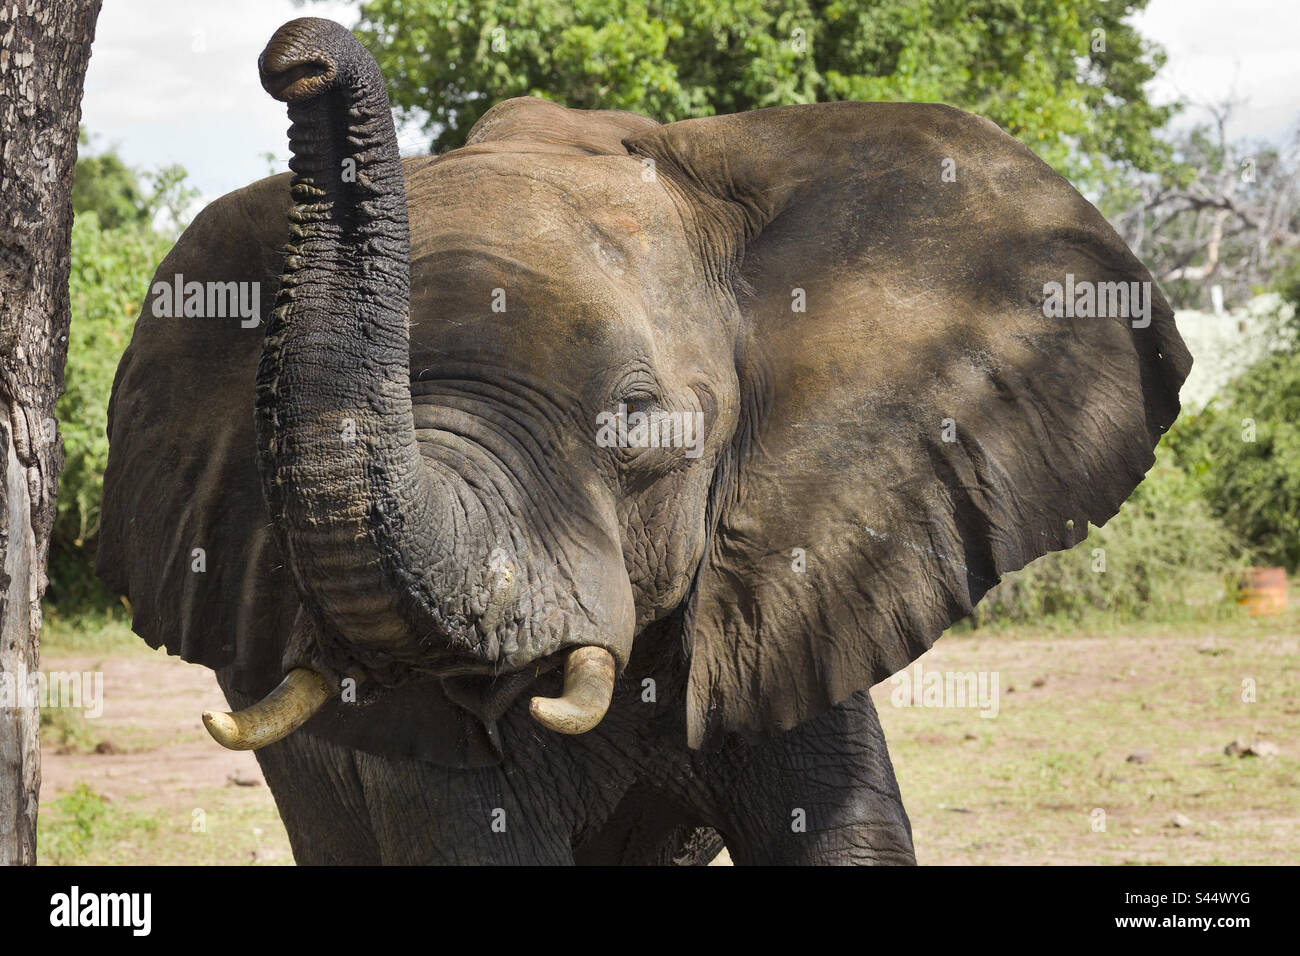 Close-up of juvenile African elephant with raised trunk posture. Stock Photo